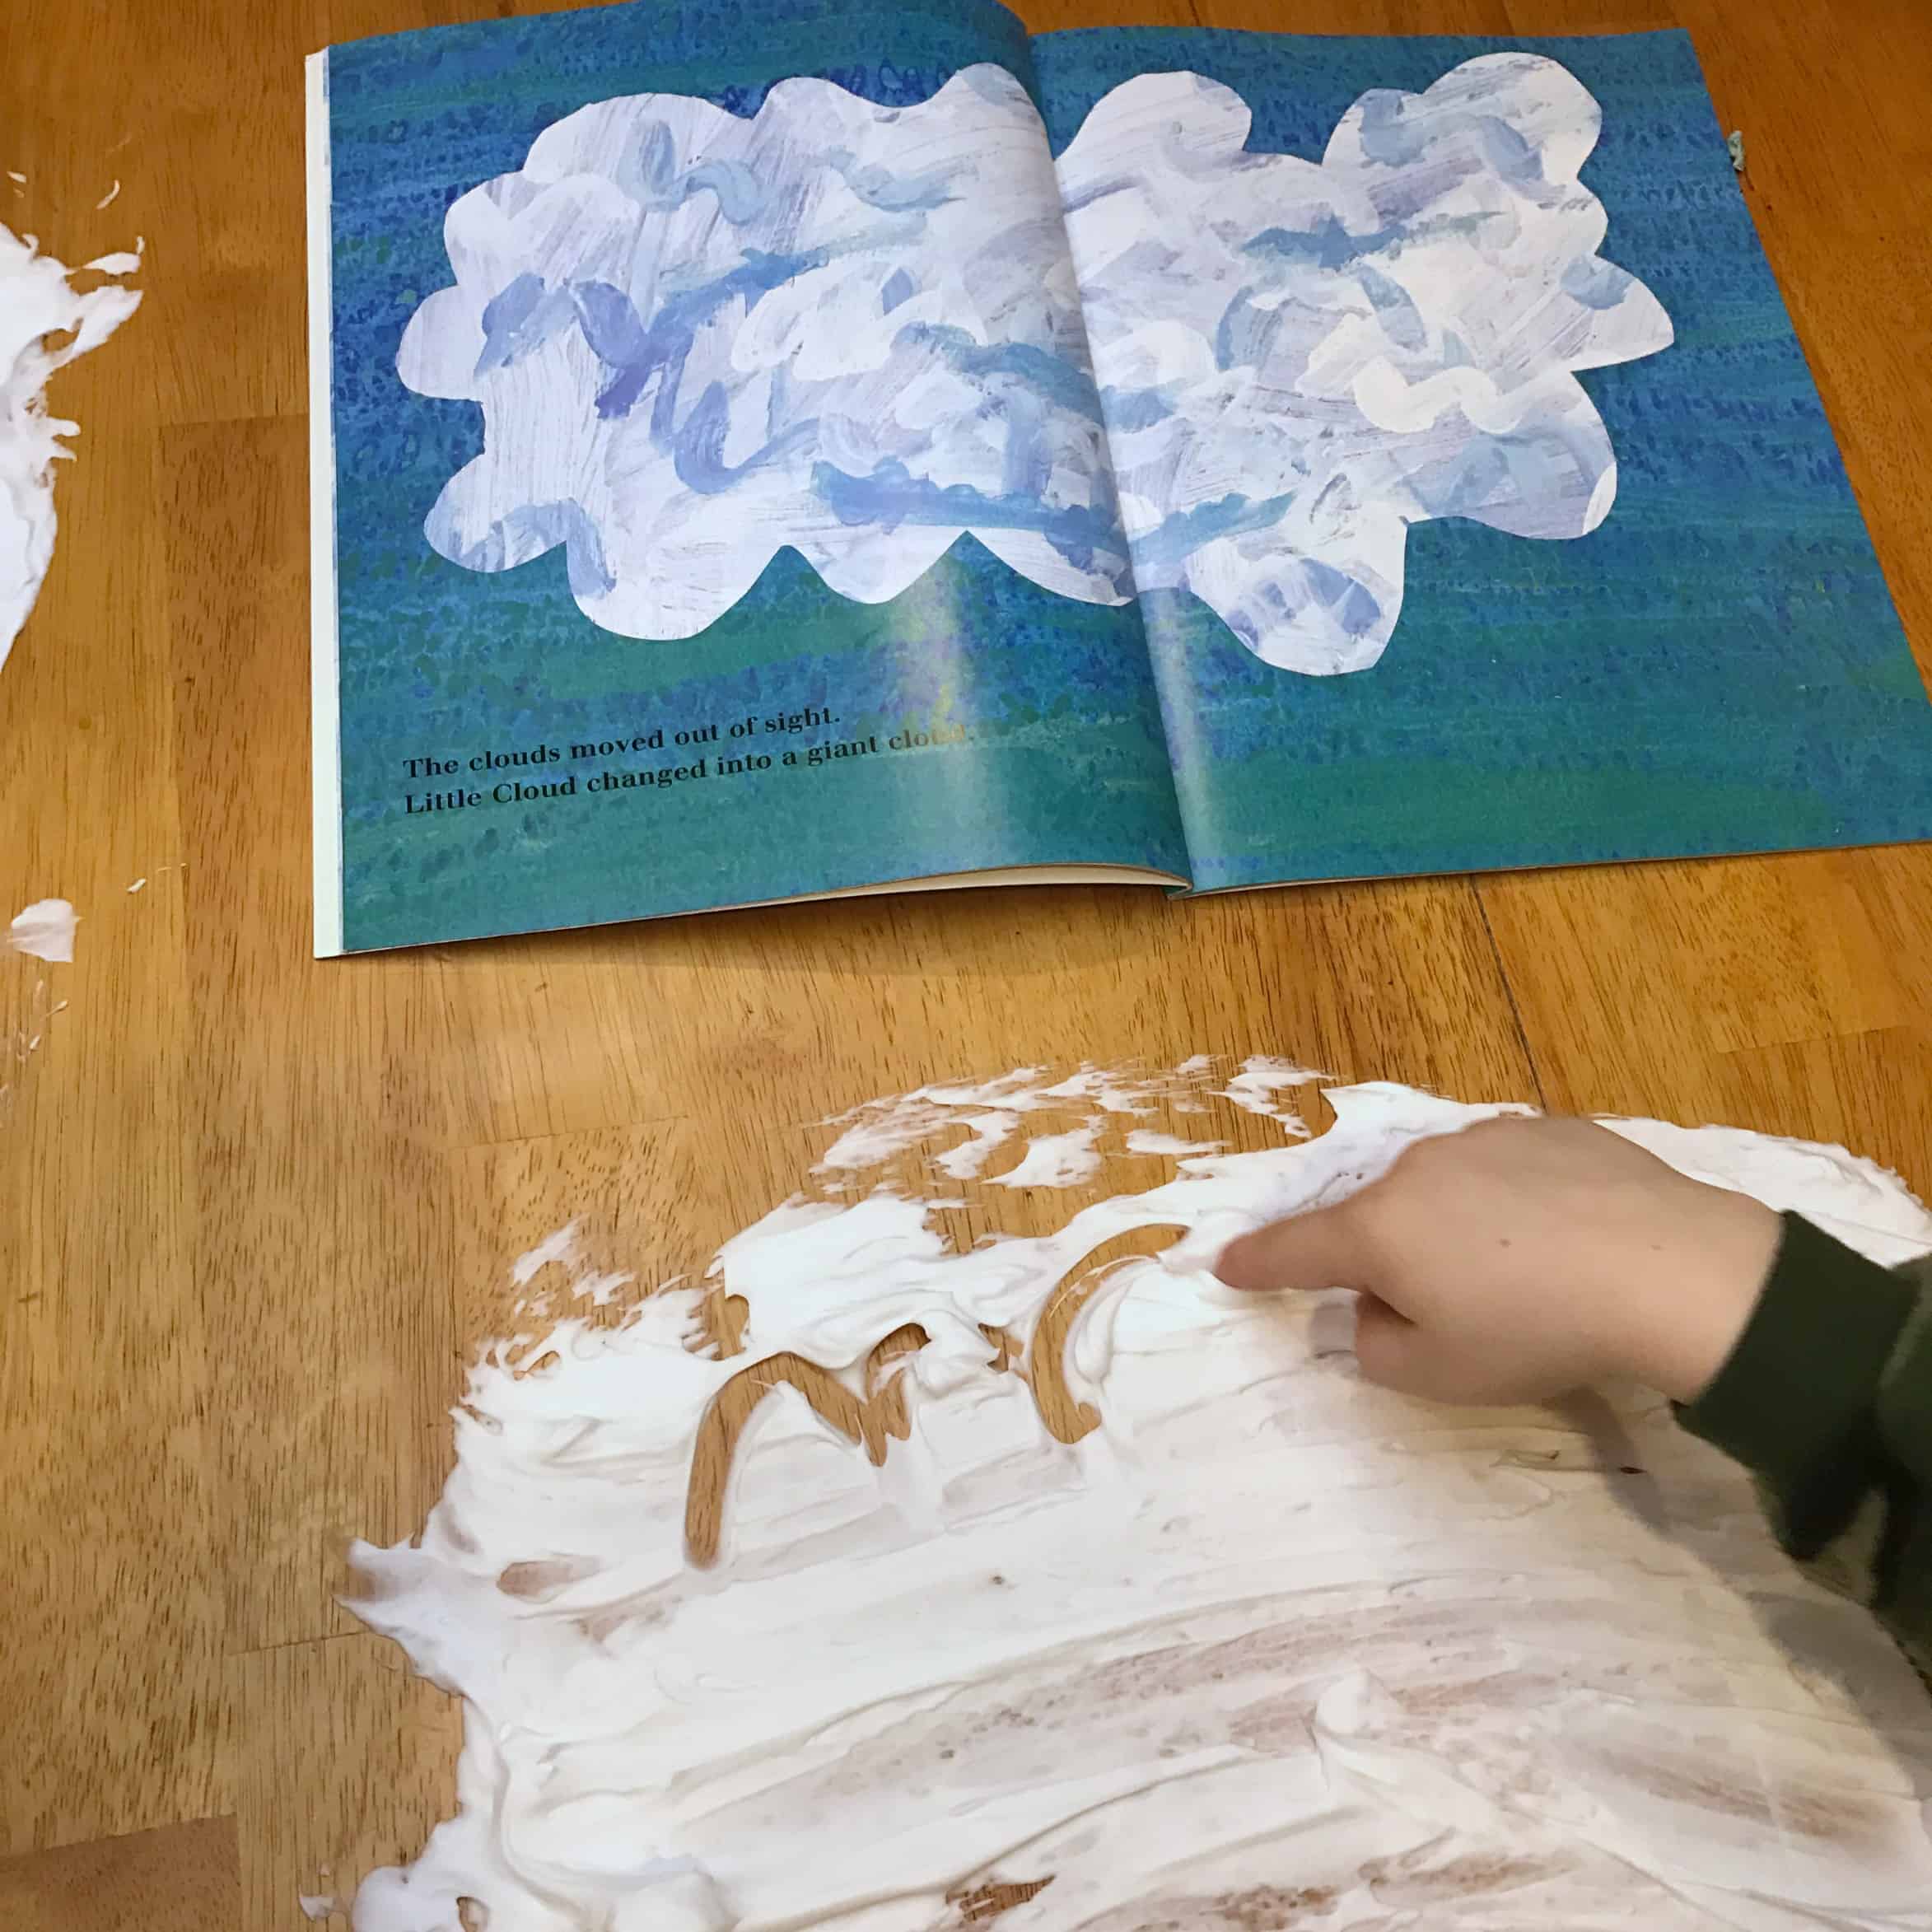 My kids just adored this book, and really enjoyed drawing clouds in shaving cream along with the book. 